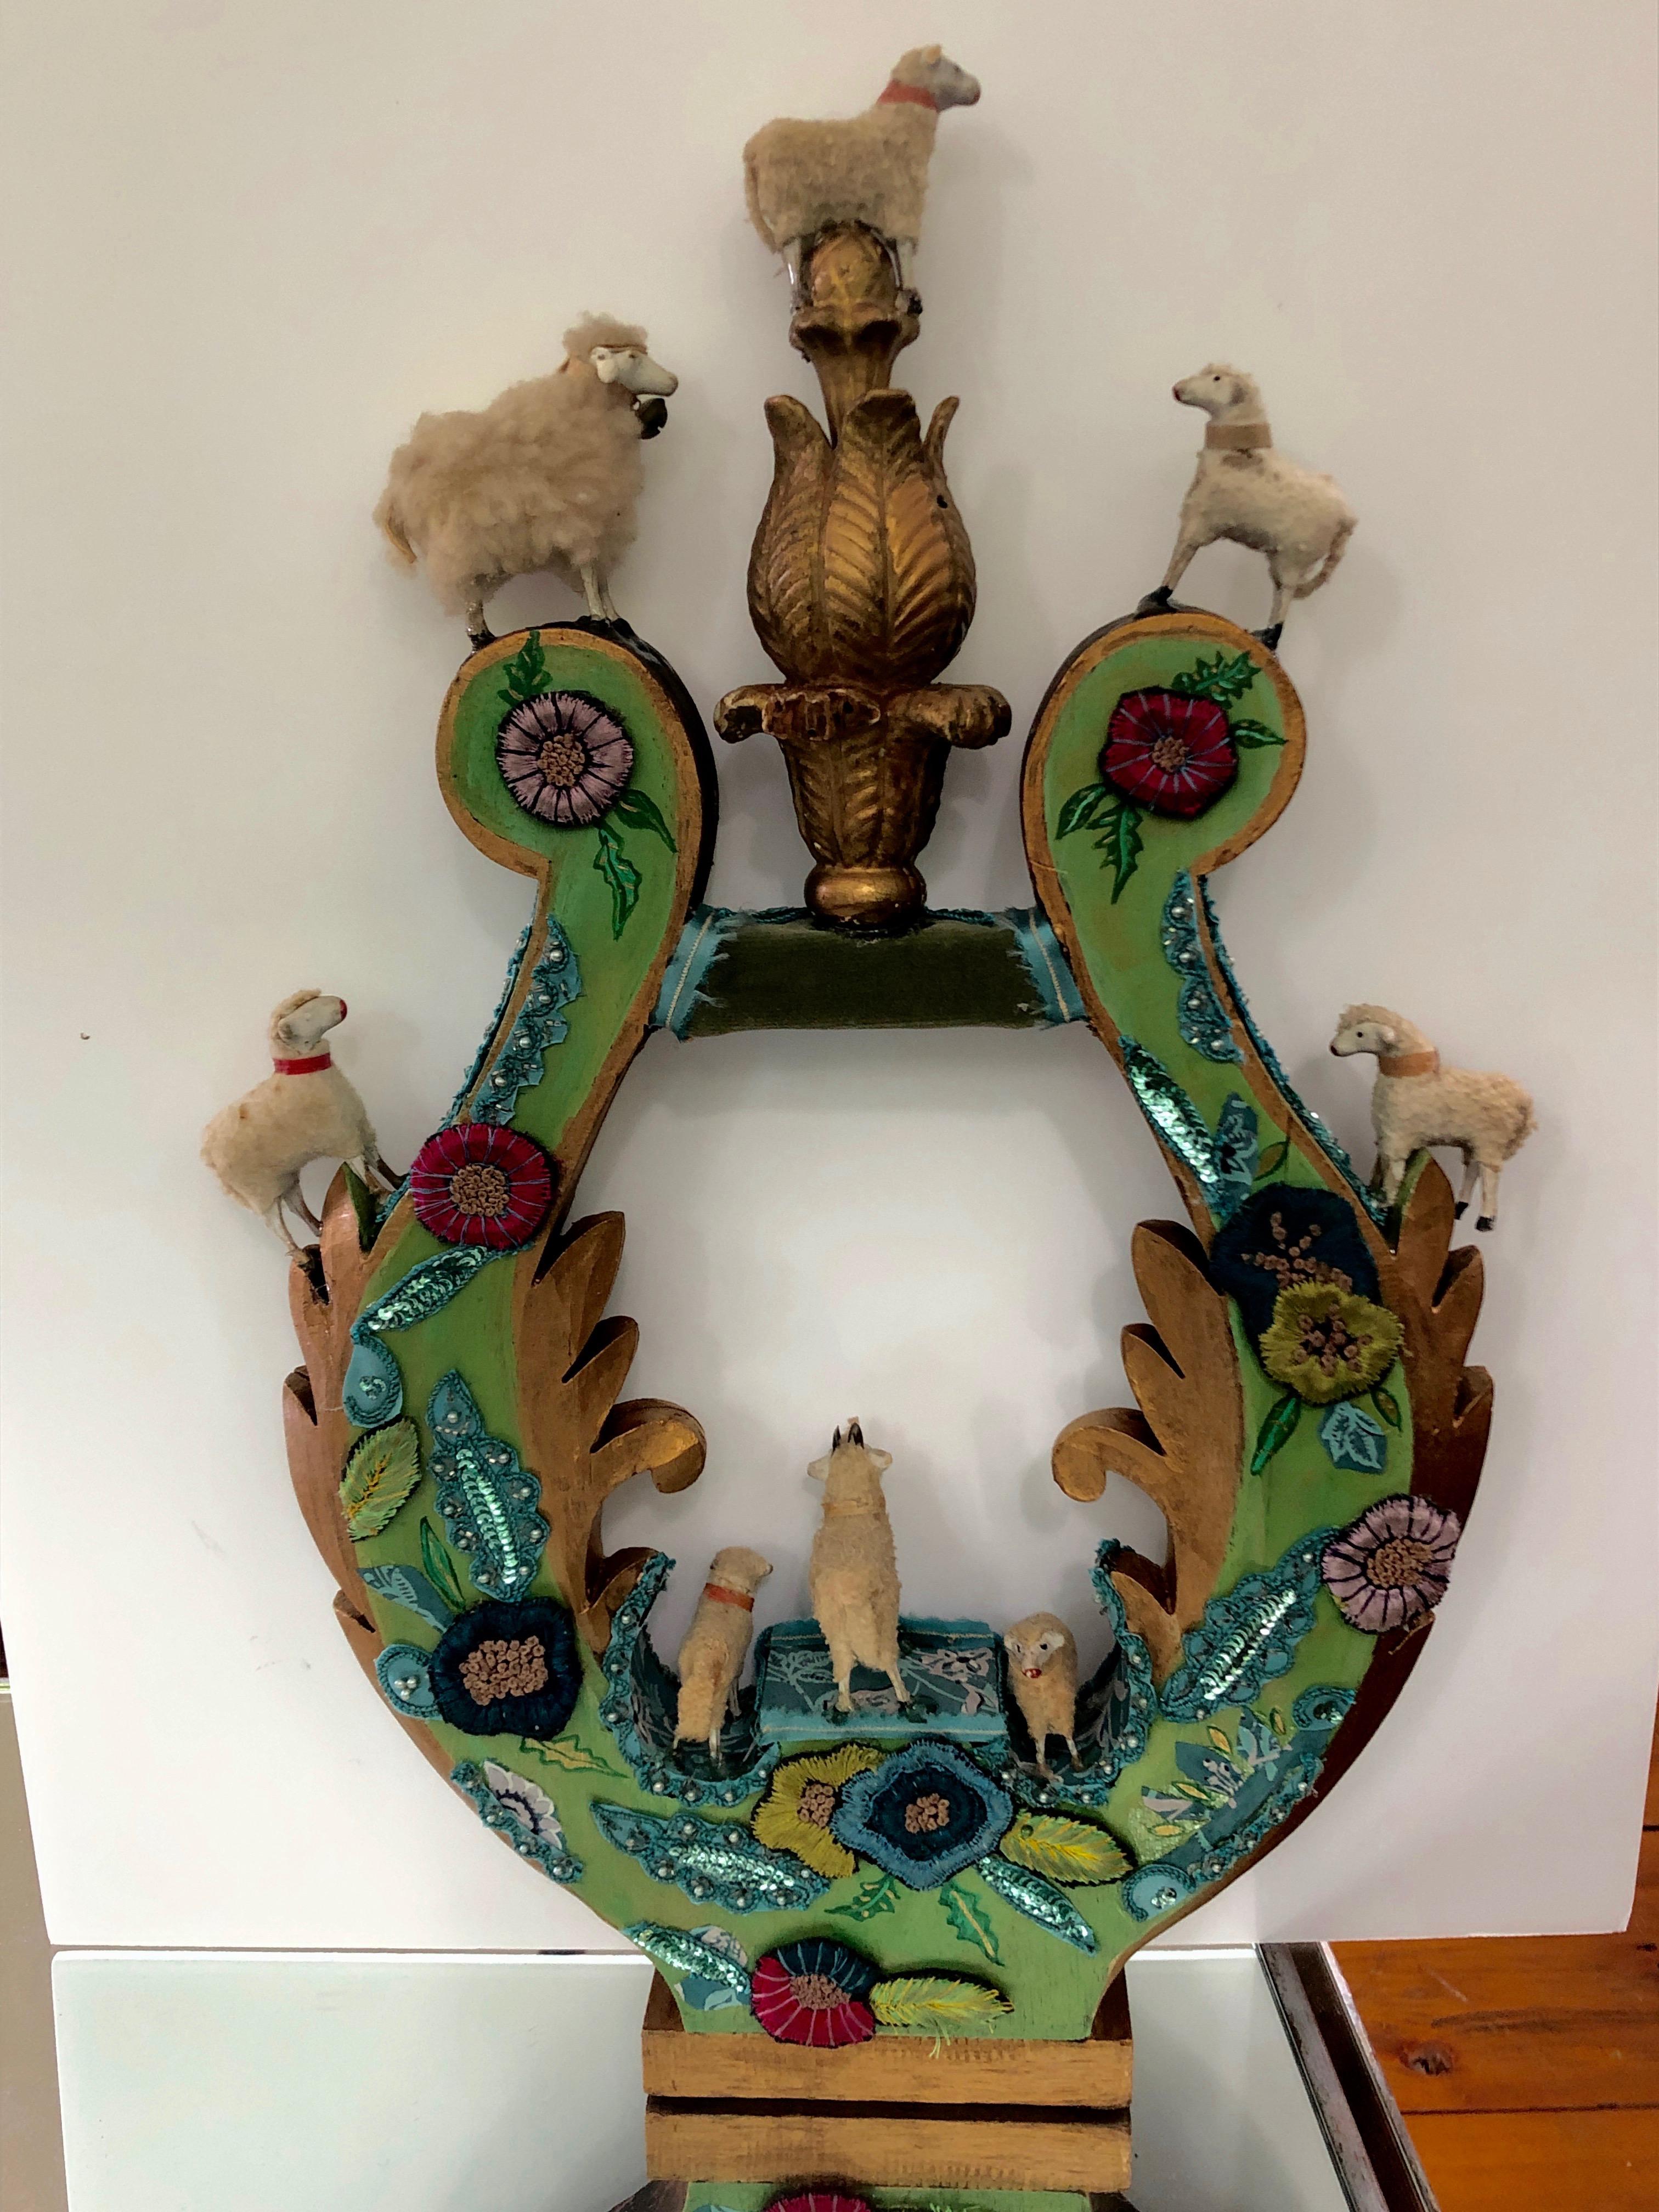 A charming imaginative sculpture created on a vintage carved wood fragment in the shape of a lyre, intricately adorned with European Folk Art handmade antique lambs, an old finial, a mix of fabrics and hand painted by the renowned Princeton artist,